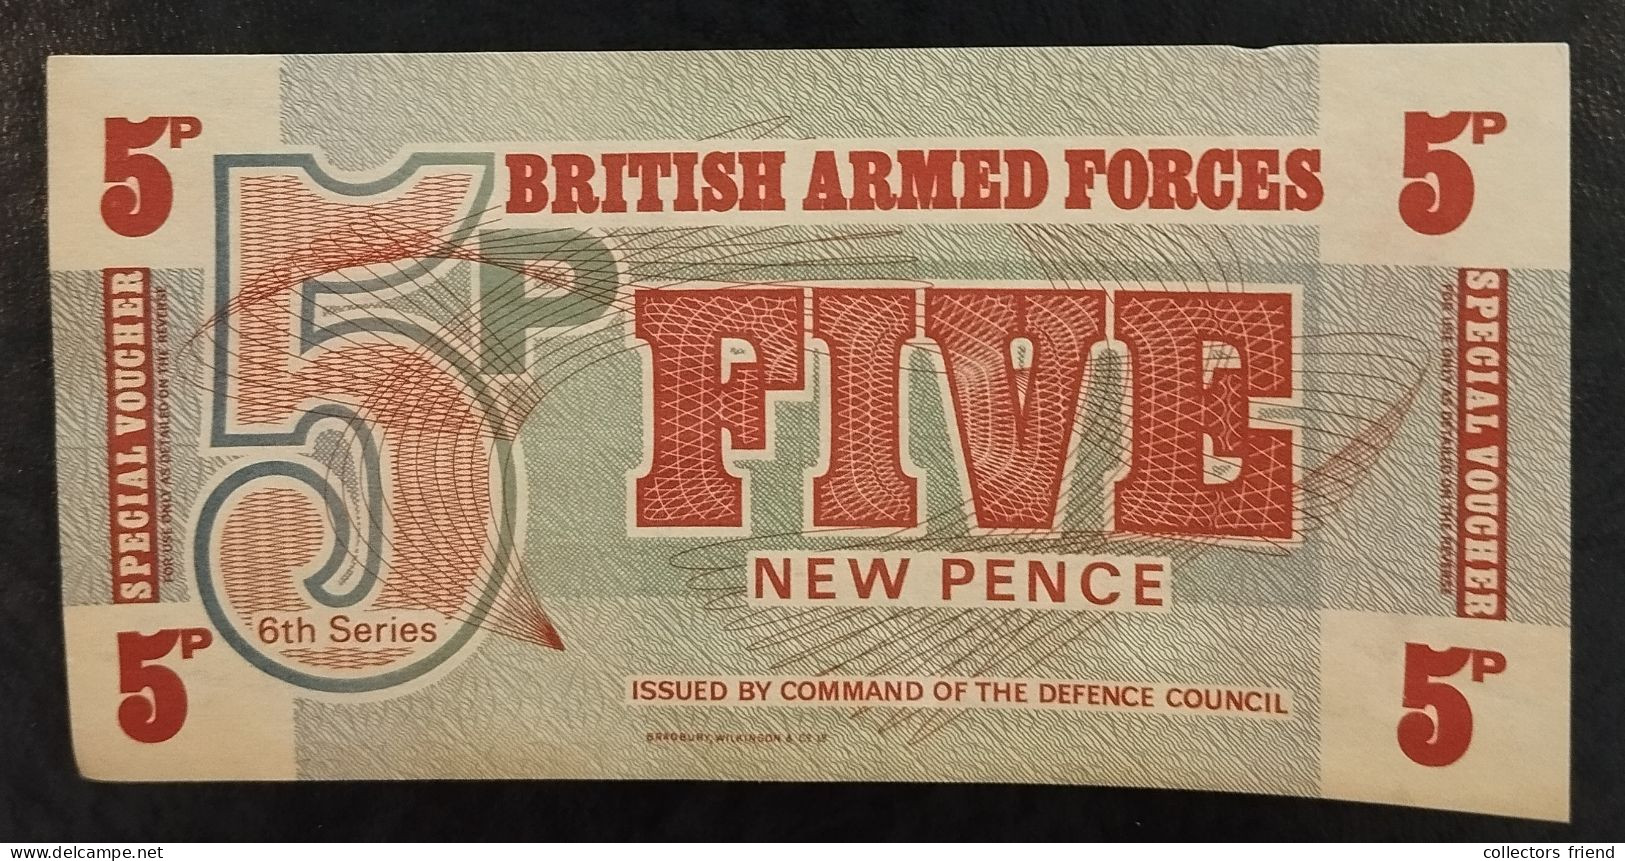 British Armed Forces - 5 + 10 New Pence - 6th Series - UNC - British Troepen & Speciale Documenten